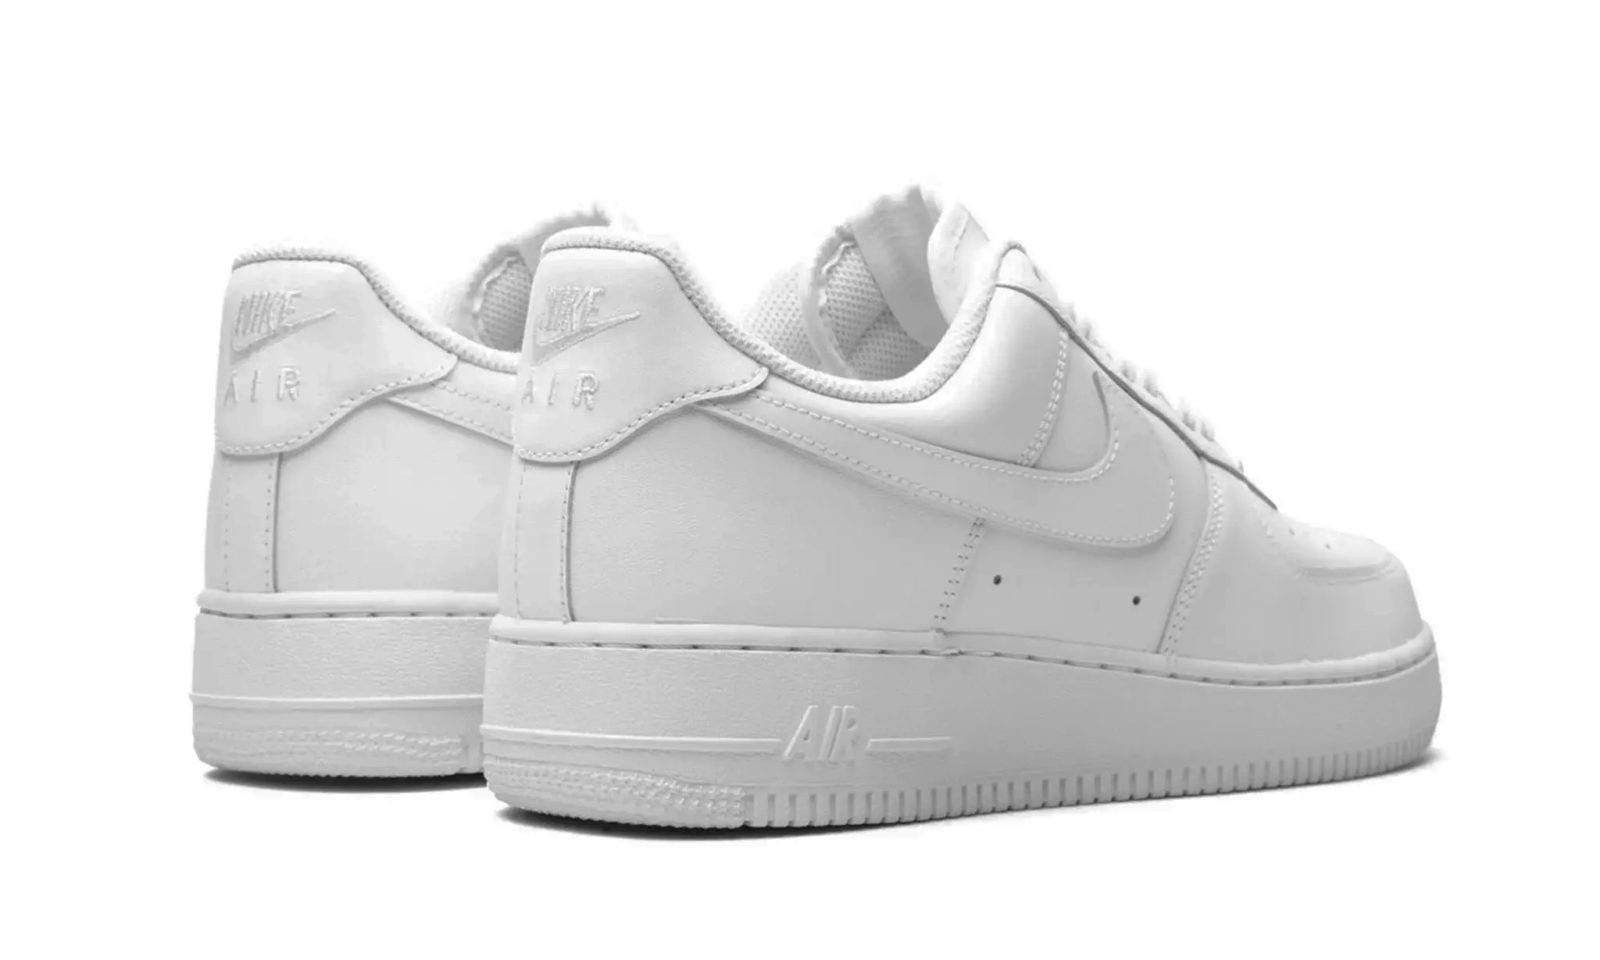 nike-air-force-1-low-07-white-on-white_16352608_43121335_2048